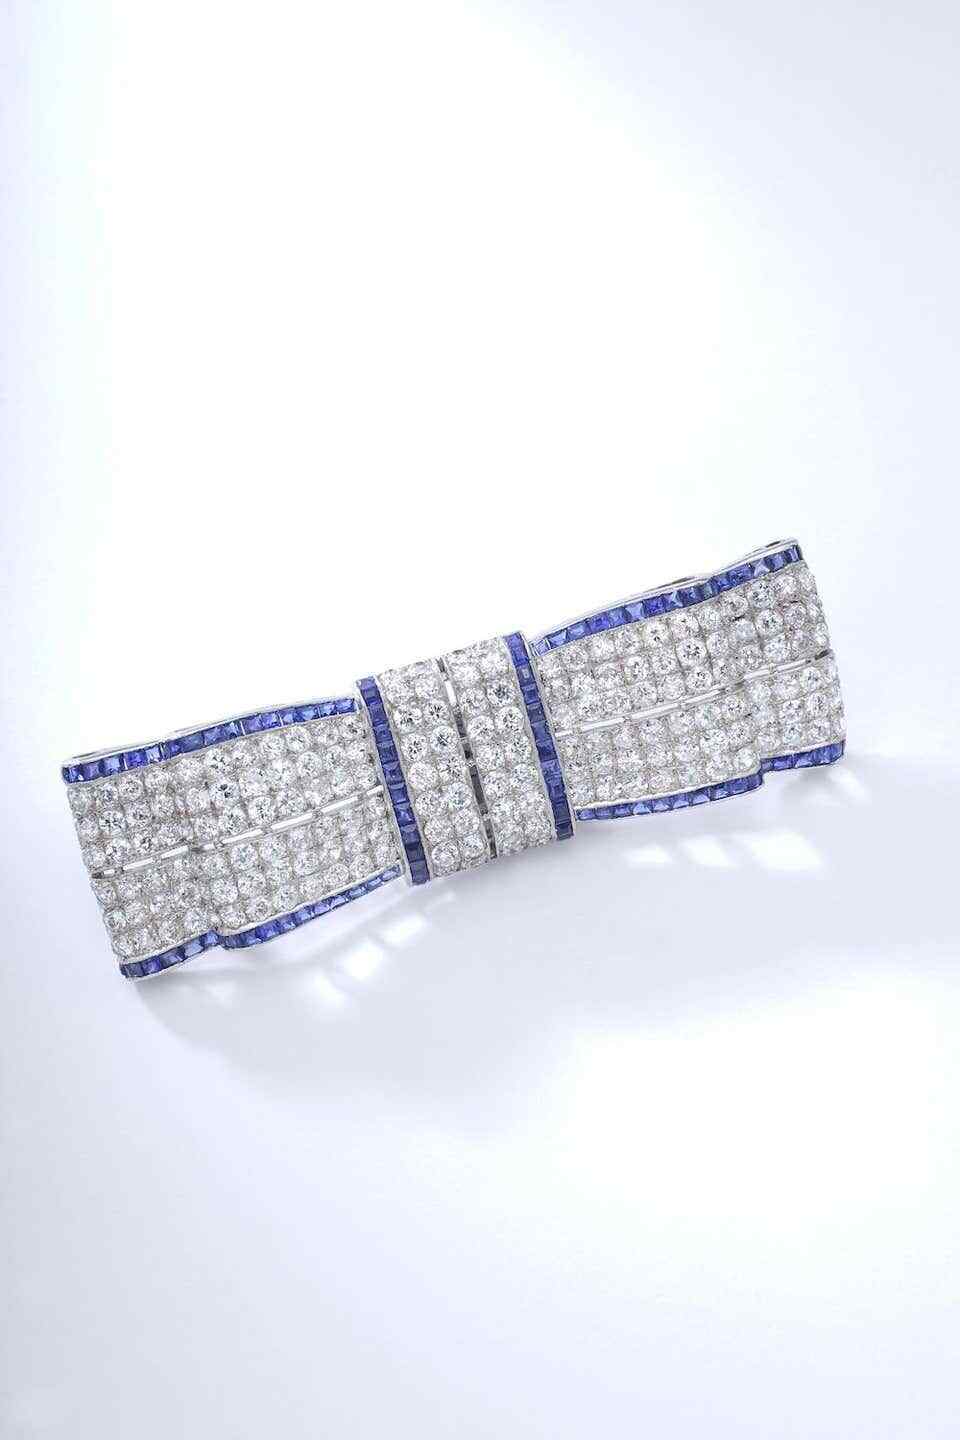 Elegant and Stunning Art Deco Bow Design Pave White CZ & Blue Sapphire Brooch